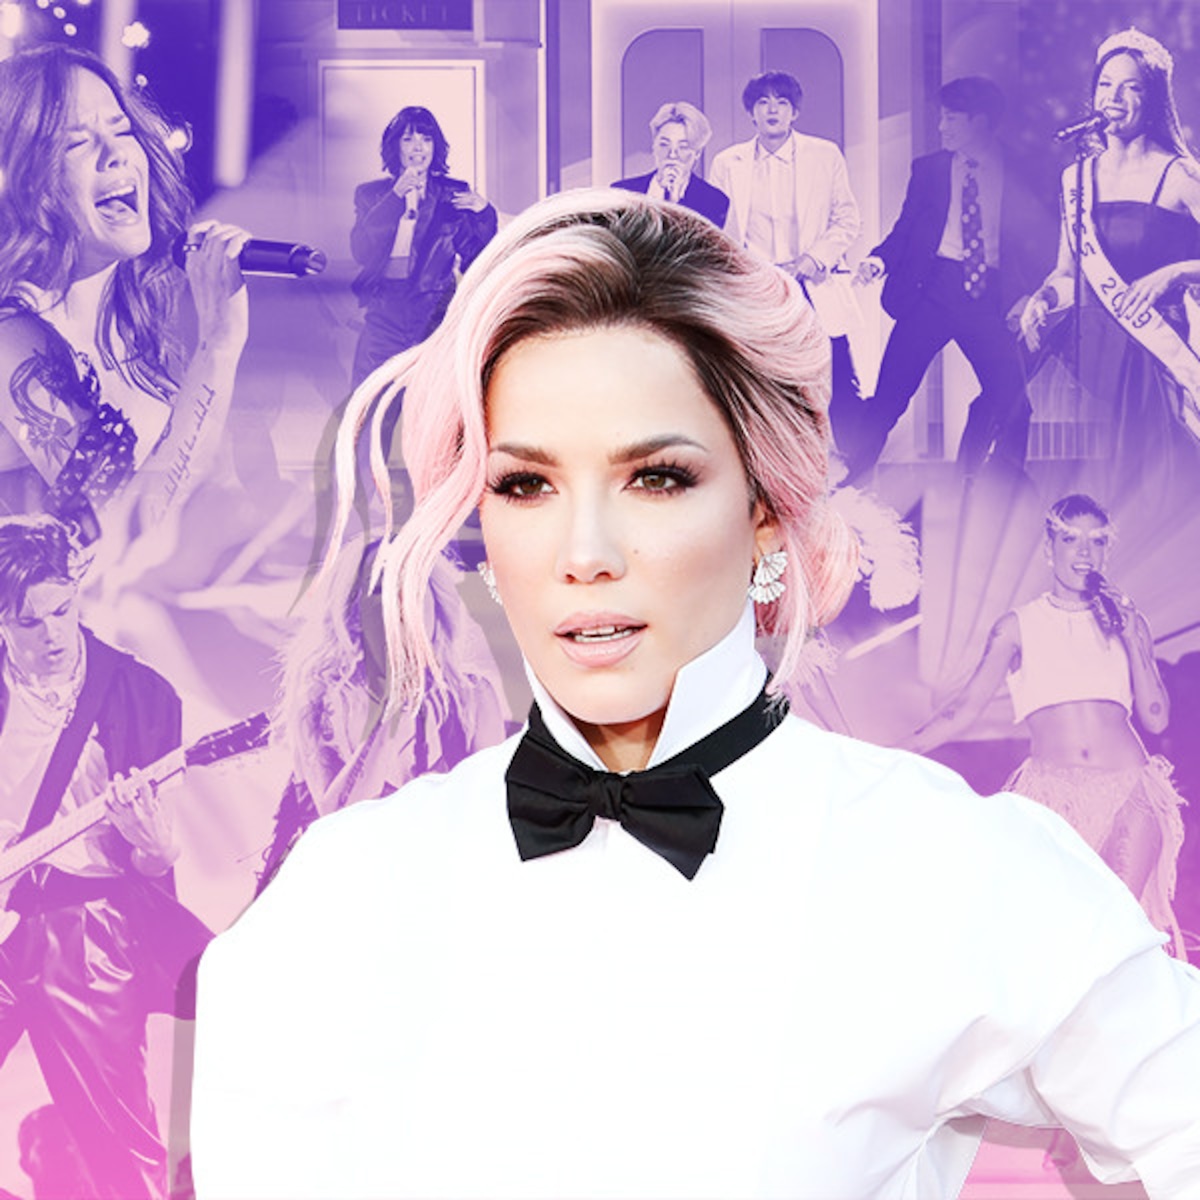 25 Fascinating Facts About Halsey - E! Online